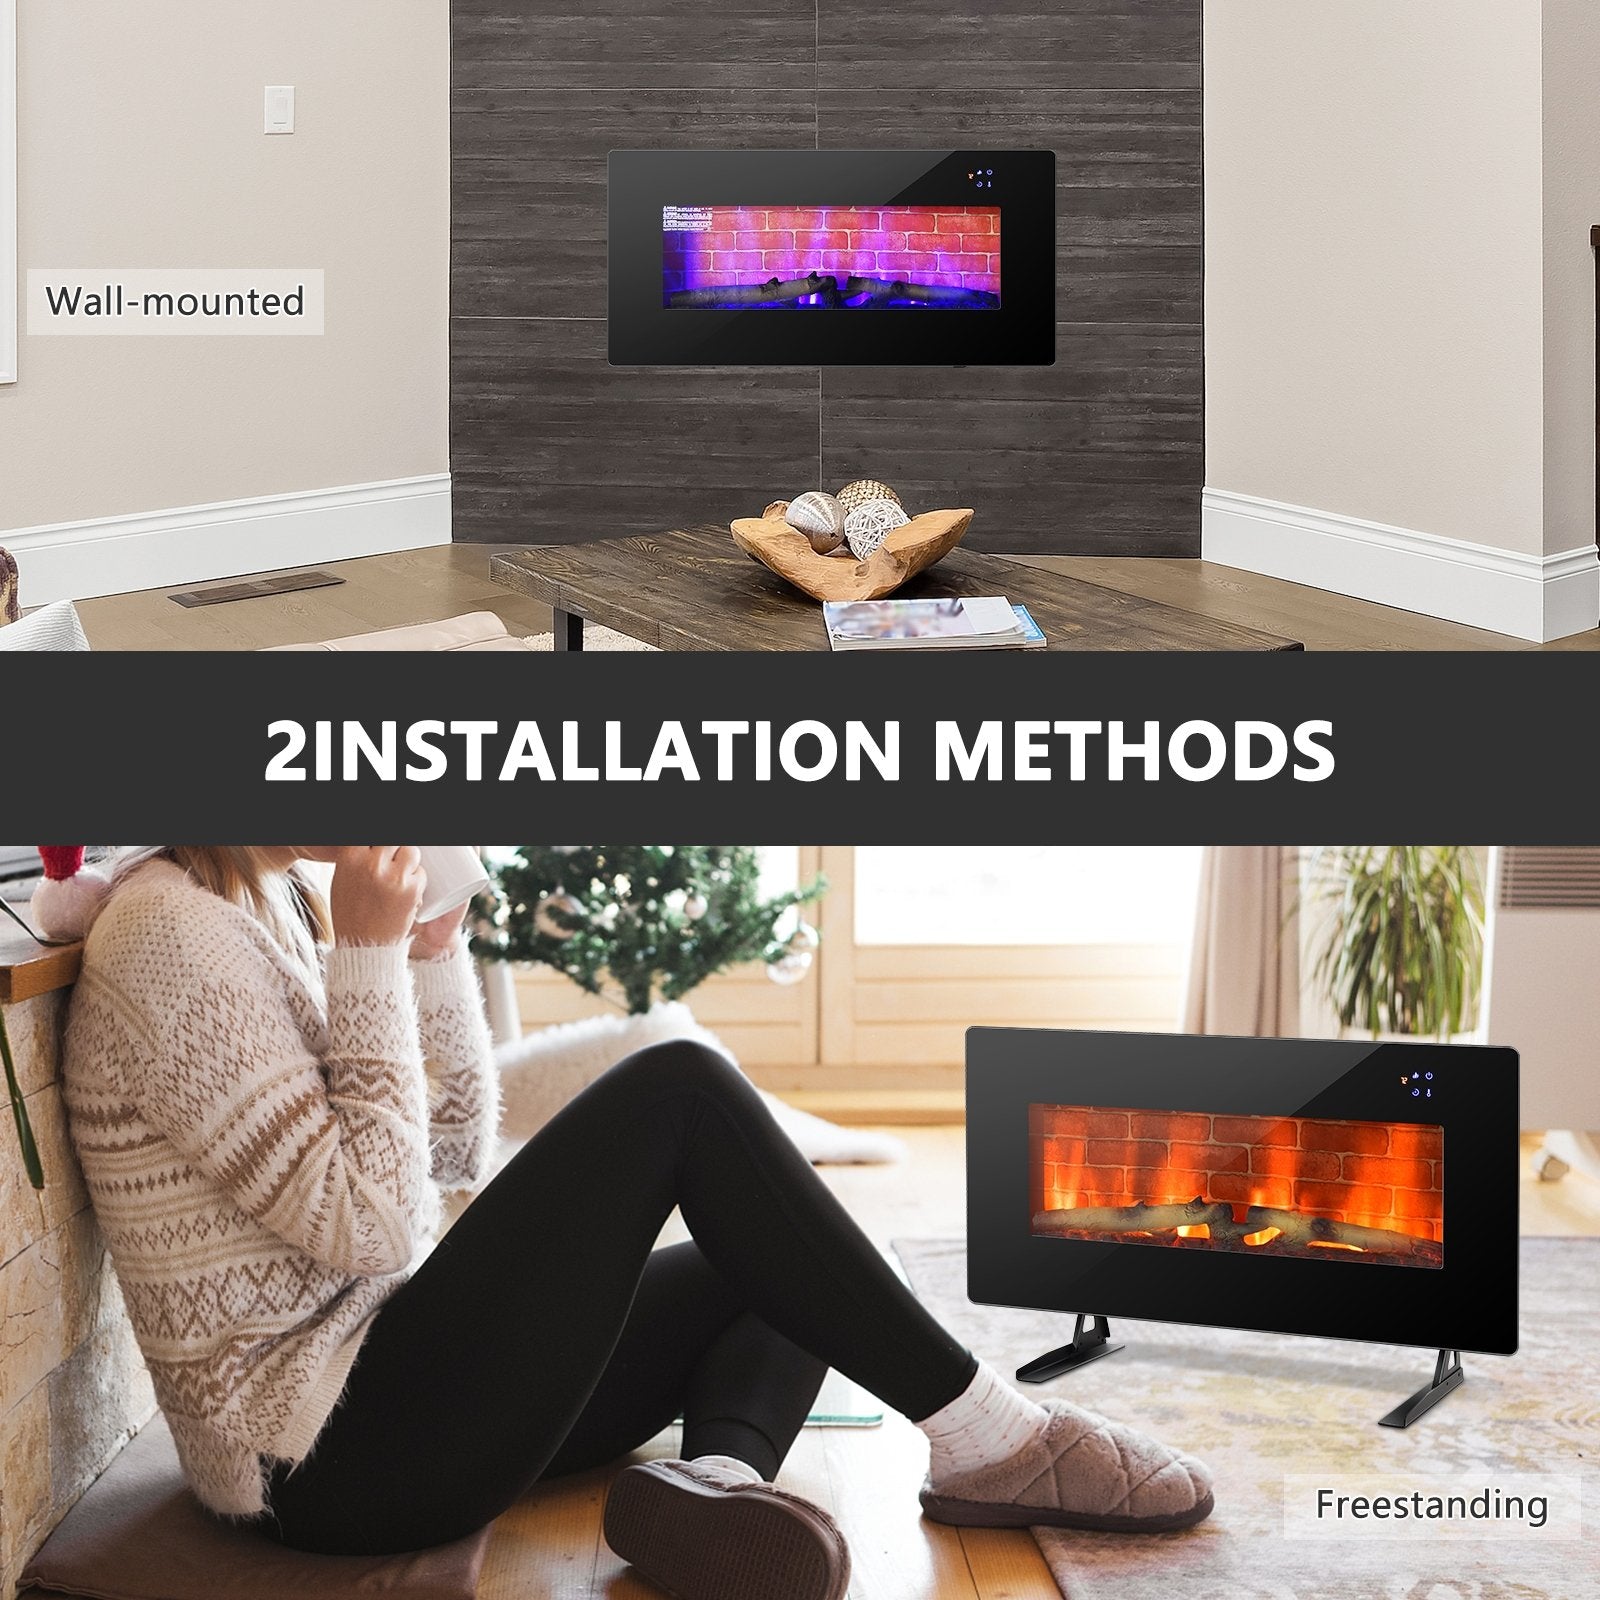 36 Inch Electric Wall Mounted Freestanding Fireplace with Remote Control, Black at Gallery Canada